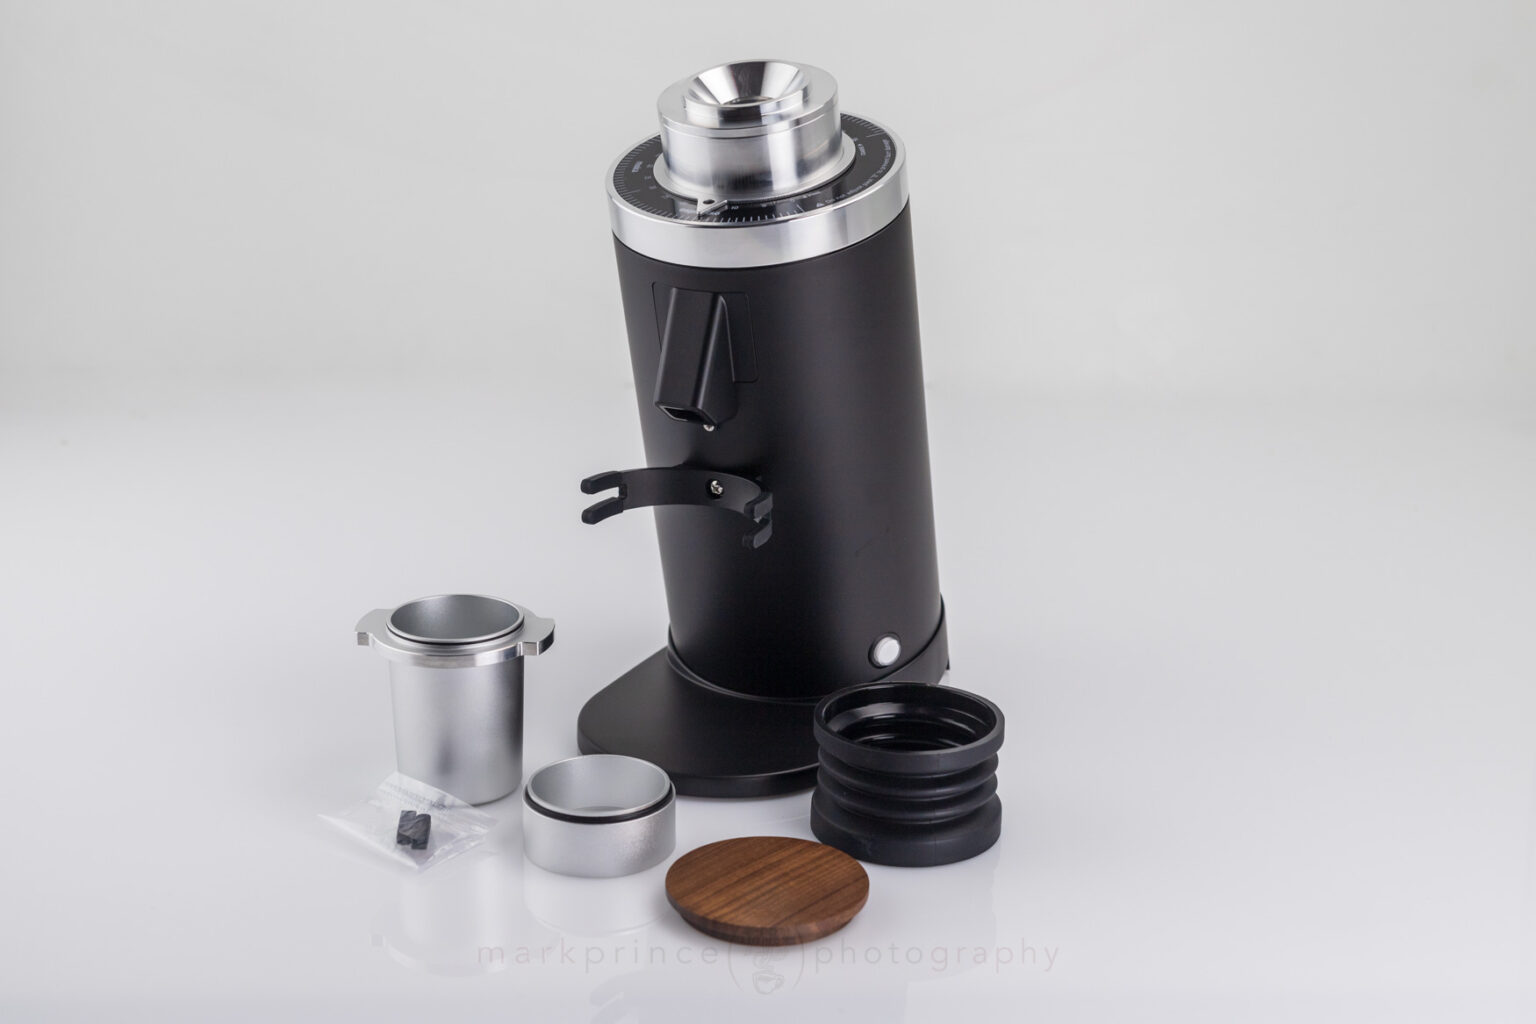 Everything in the box with the DF64 Gen 2 grinder